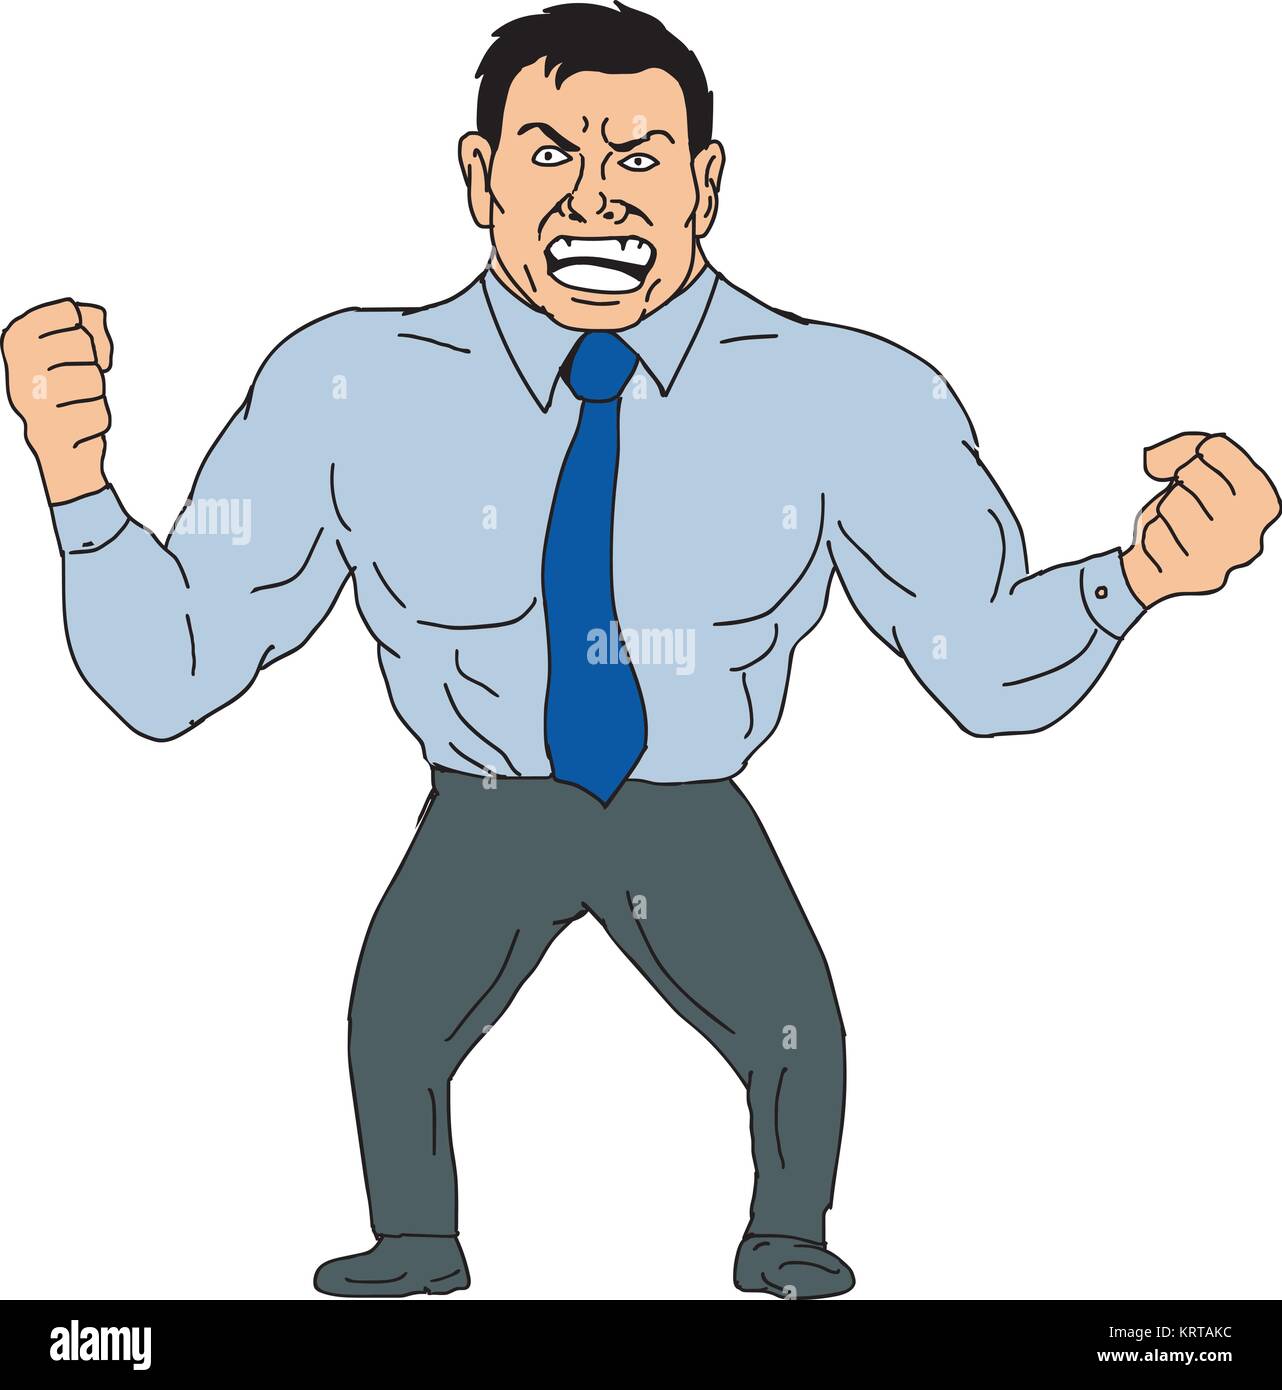 Cartoon style illustration of an angry businessman with clenched fist and shouting viewed from front on isolated background. Stock Vector